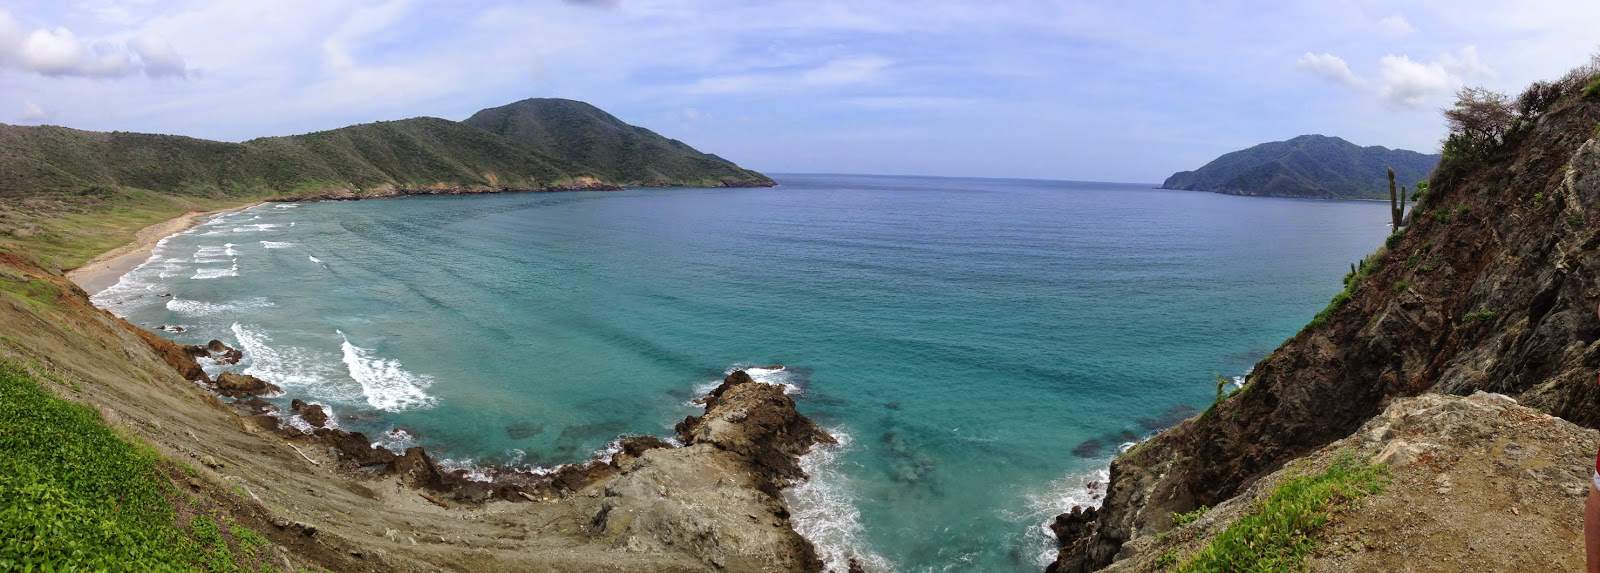 Siete Olas at Tayrona National Park in Colombia